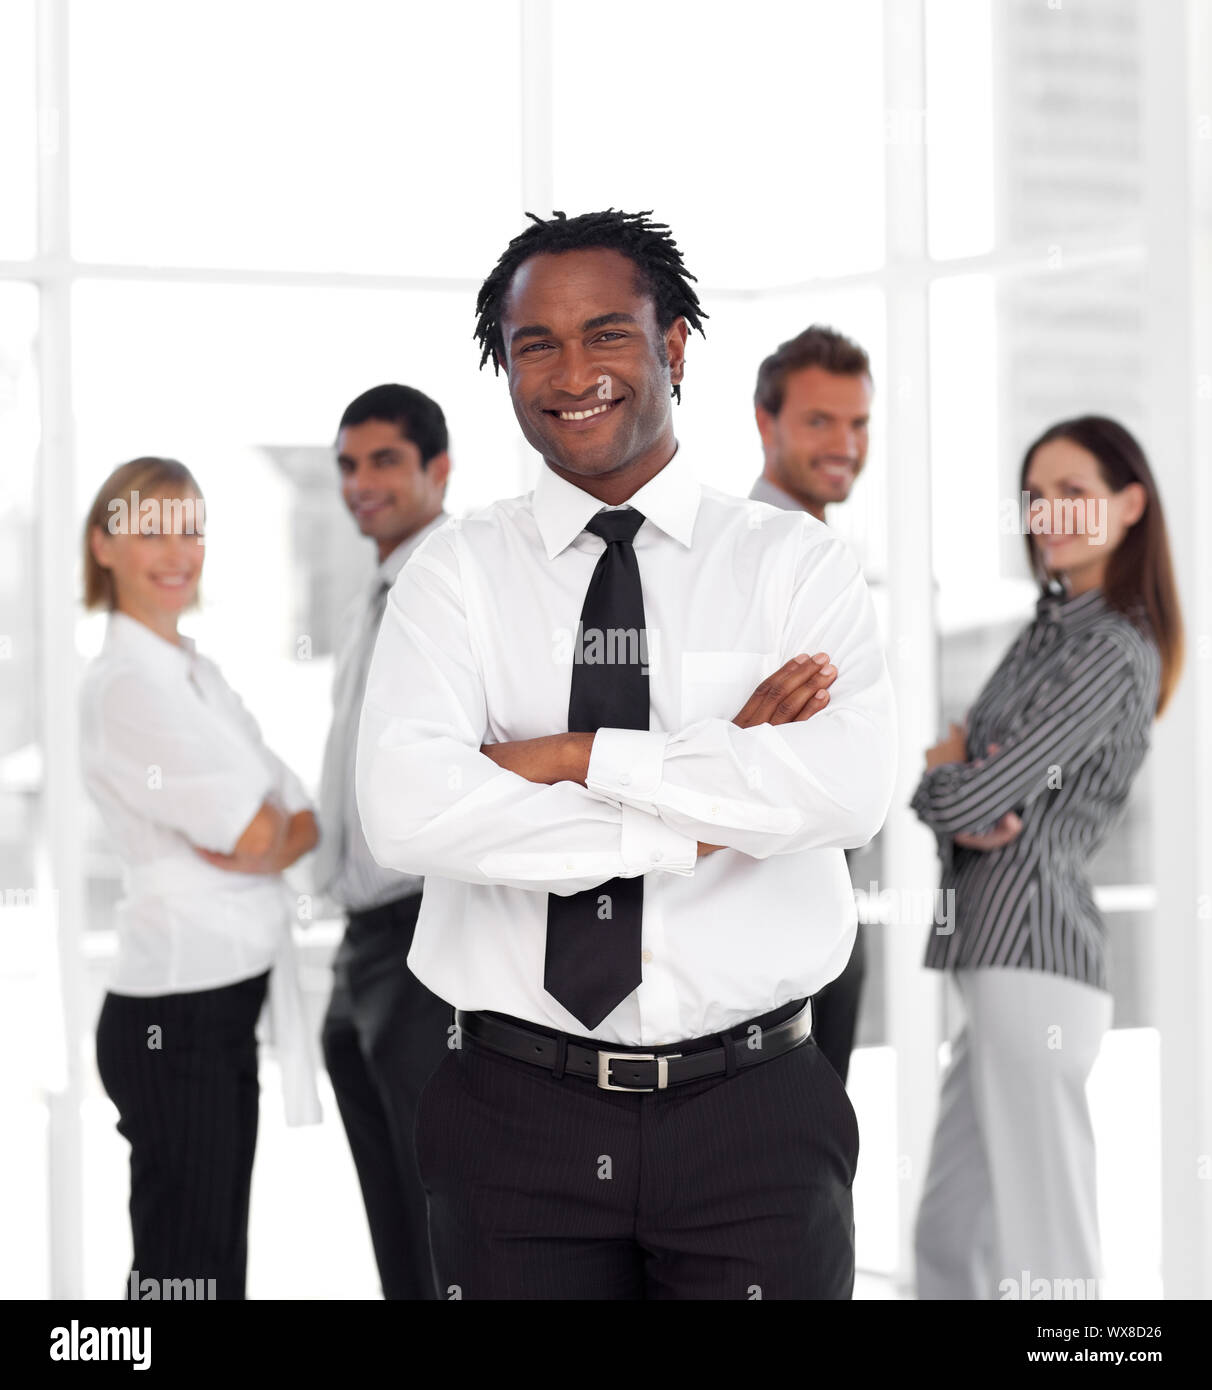 Business staff applauding during a meeting Stock Photo